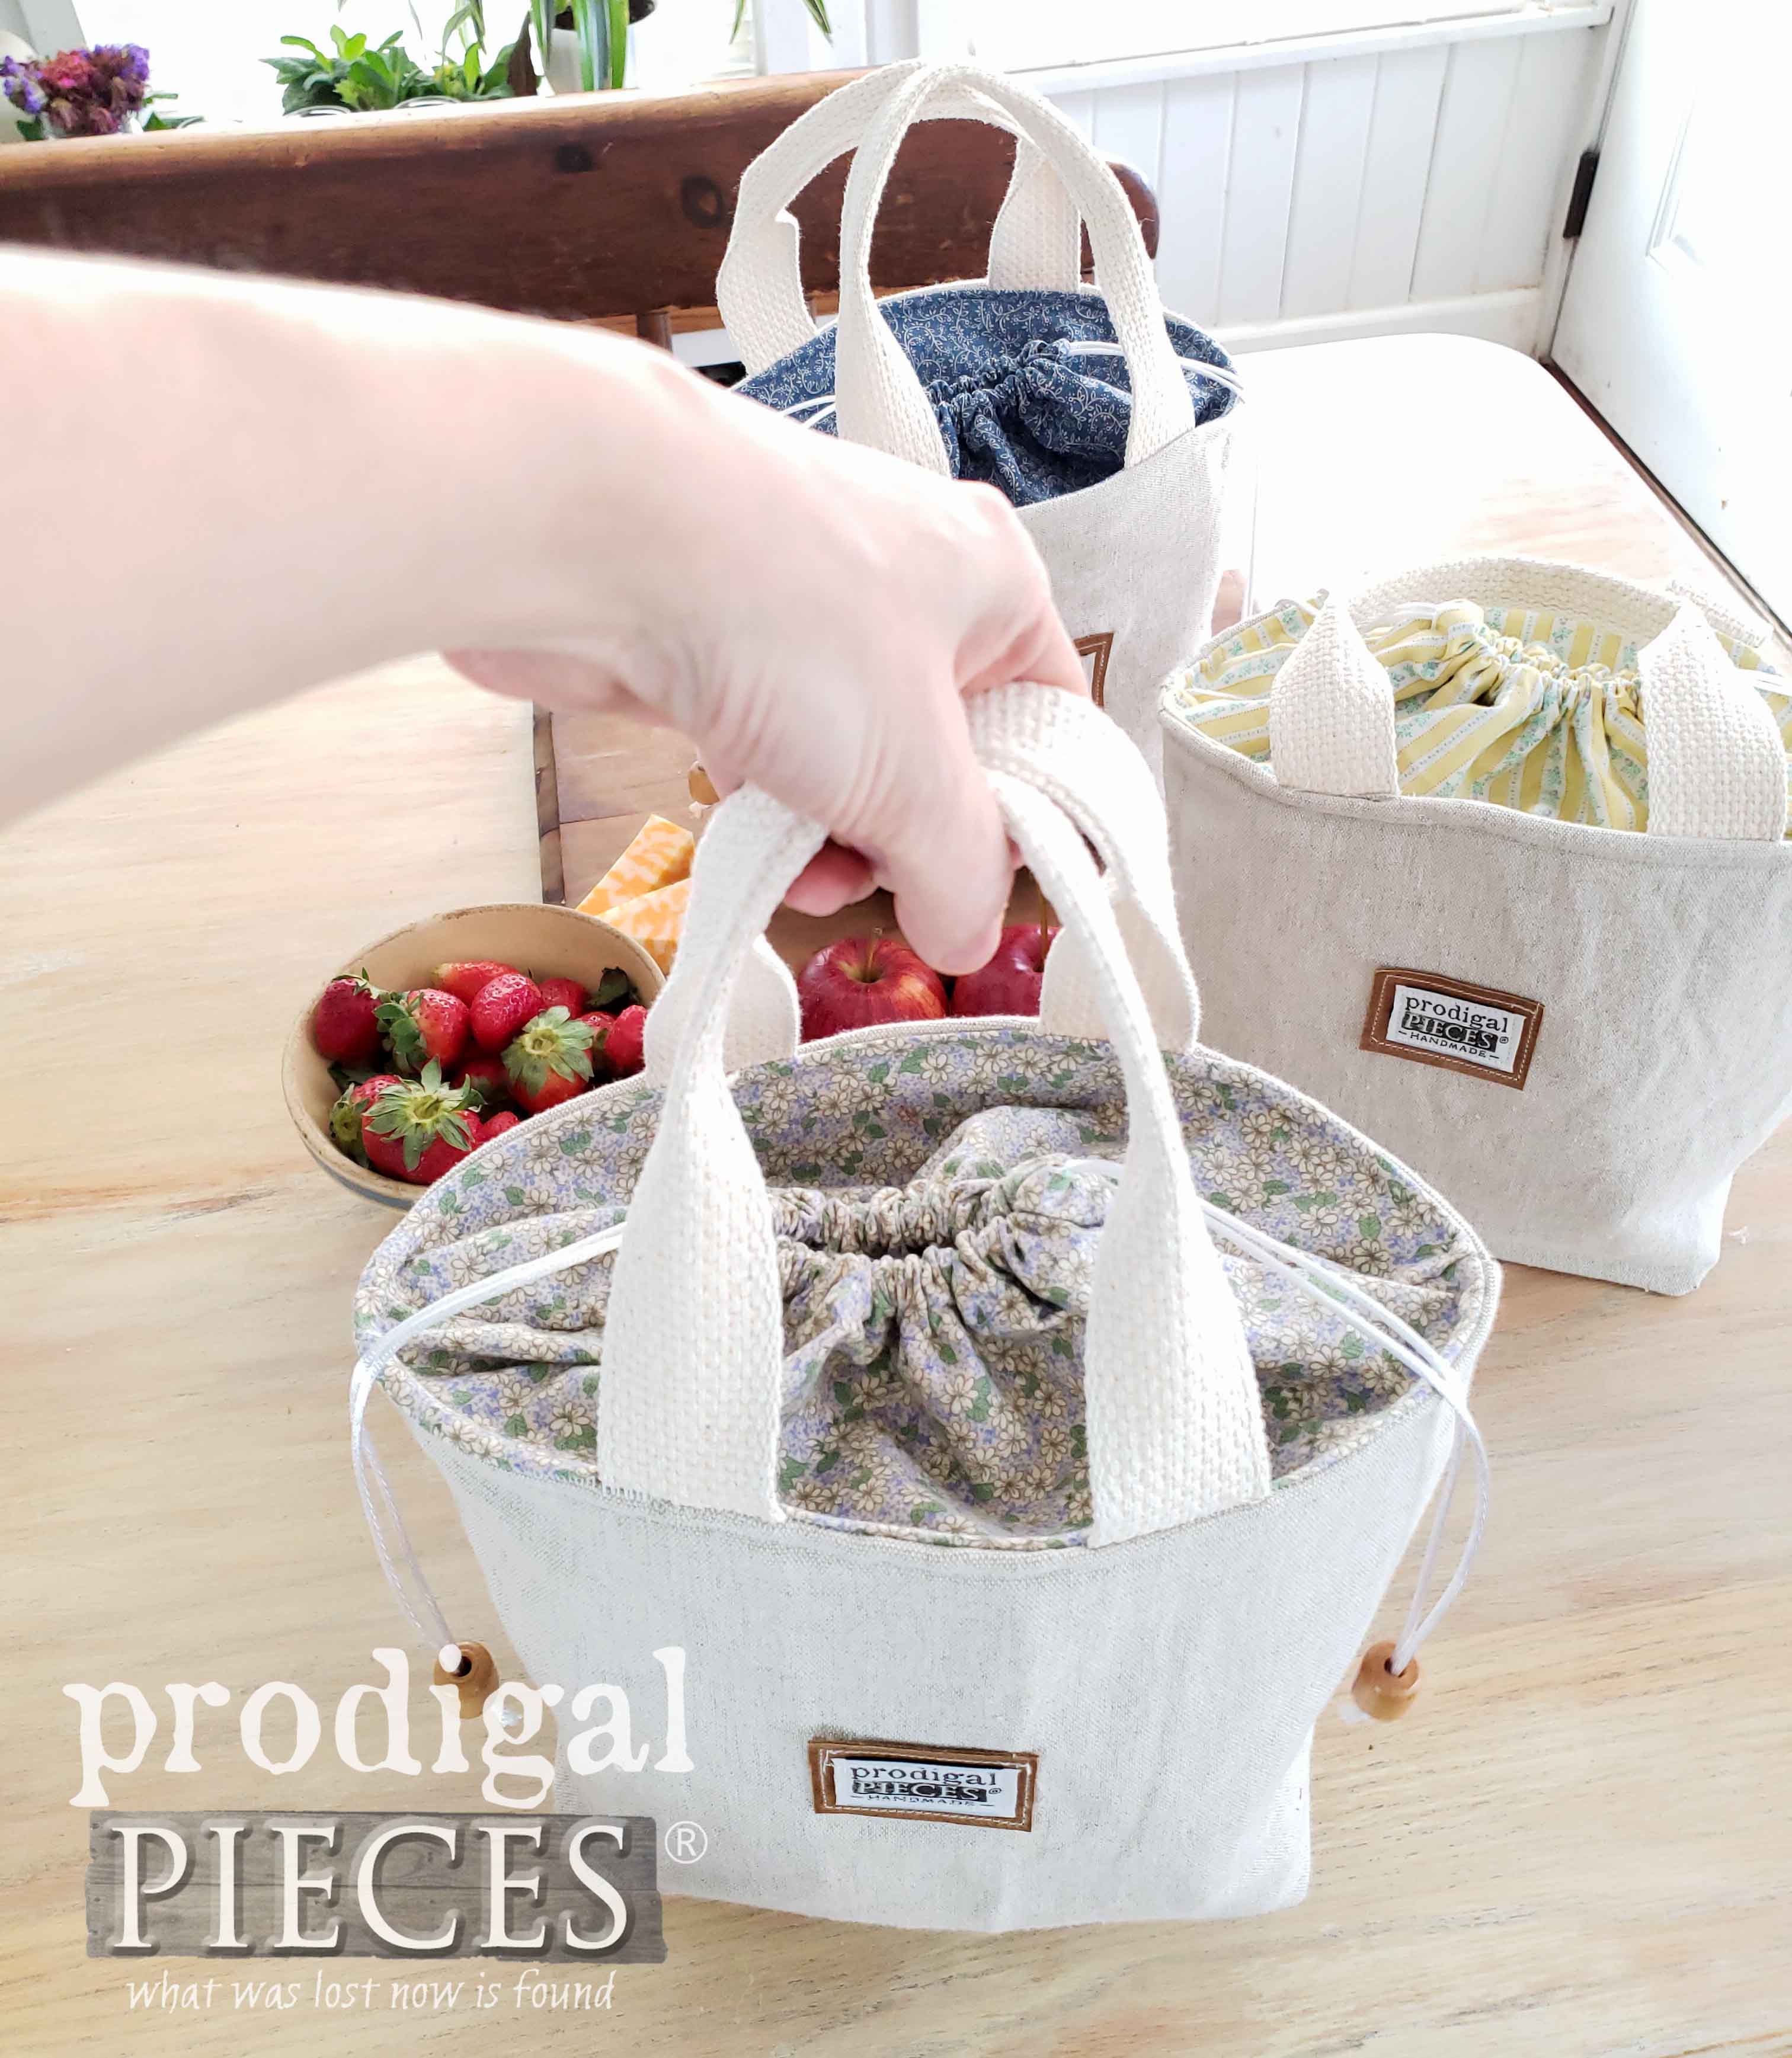 Holding Insulated Linen Lunch Bag Created by Larissa of Prodigal Pieces | prodigalpieces.com #prodigalpieces #handmade #home #sewing #fashion